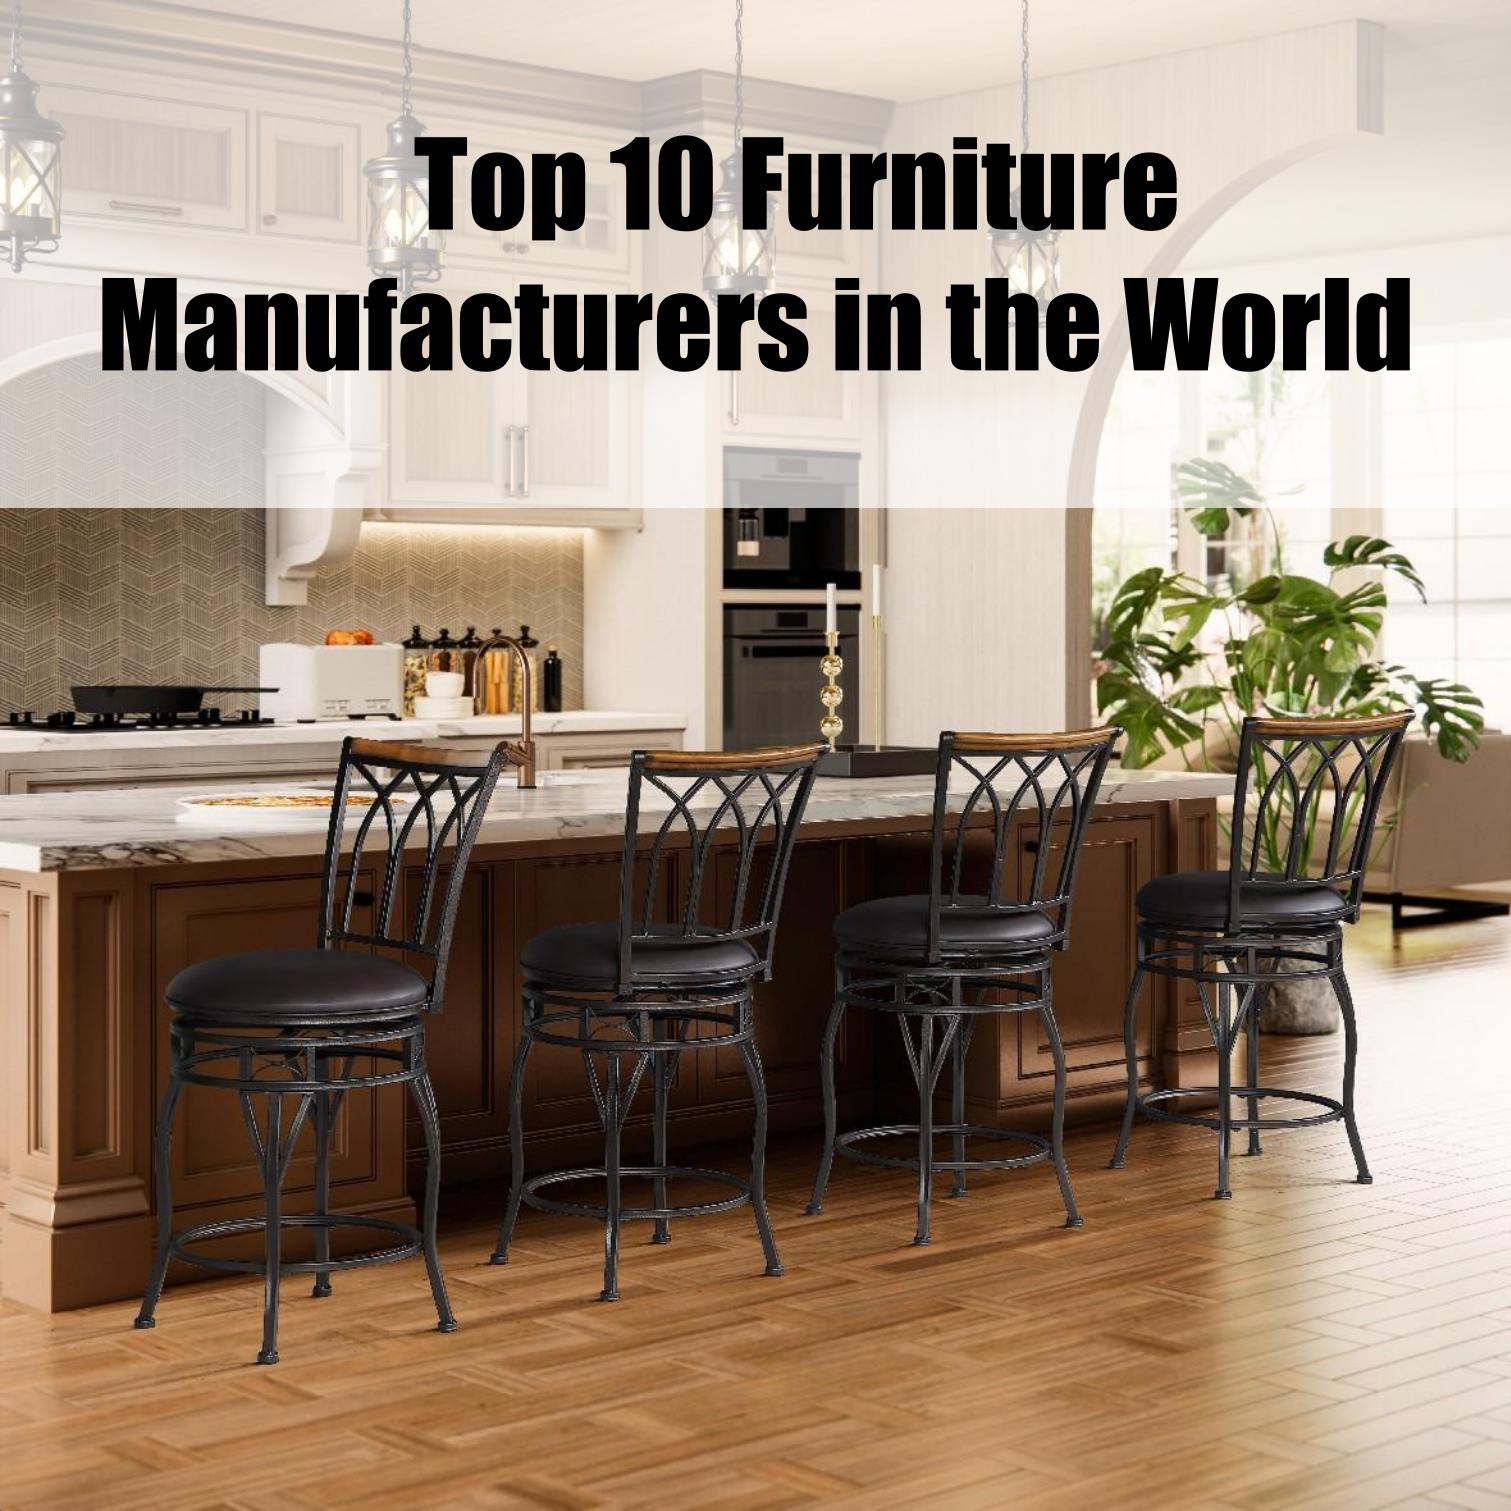 Top 10 Furniture Manufacturers in the World